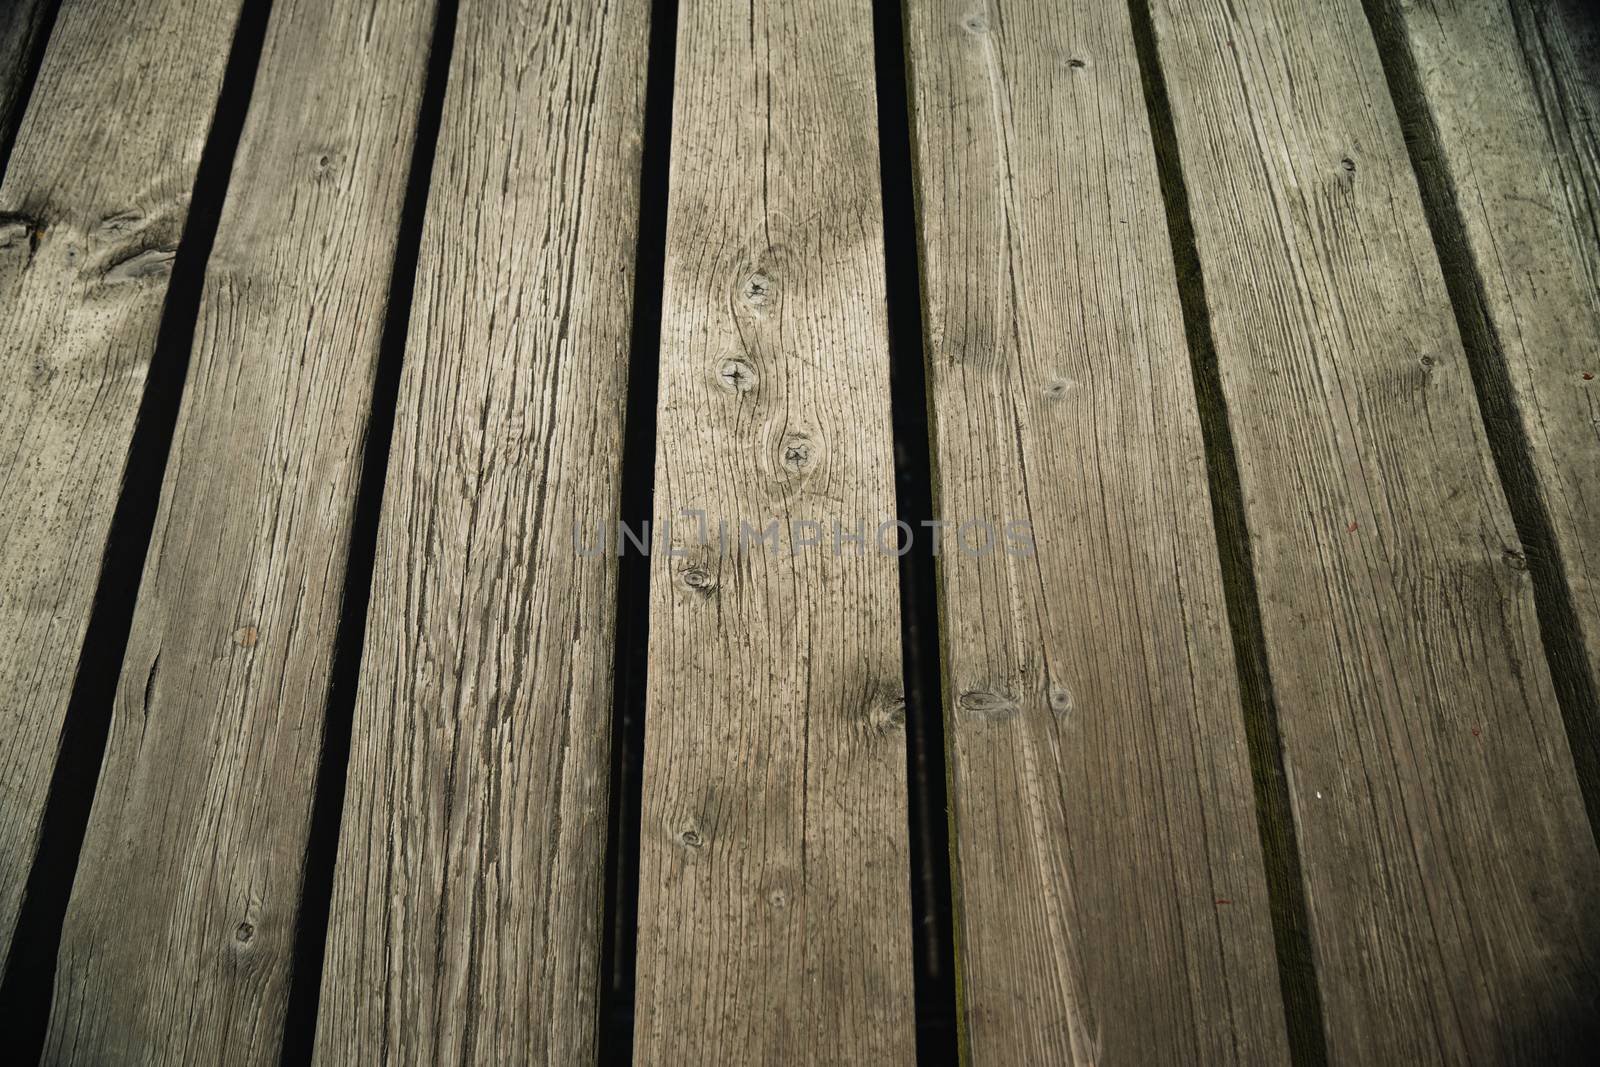 Some wooden planks from a pier in england at th seaside